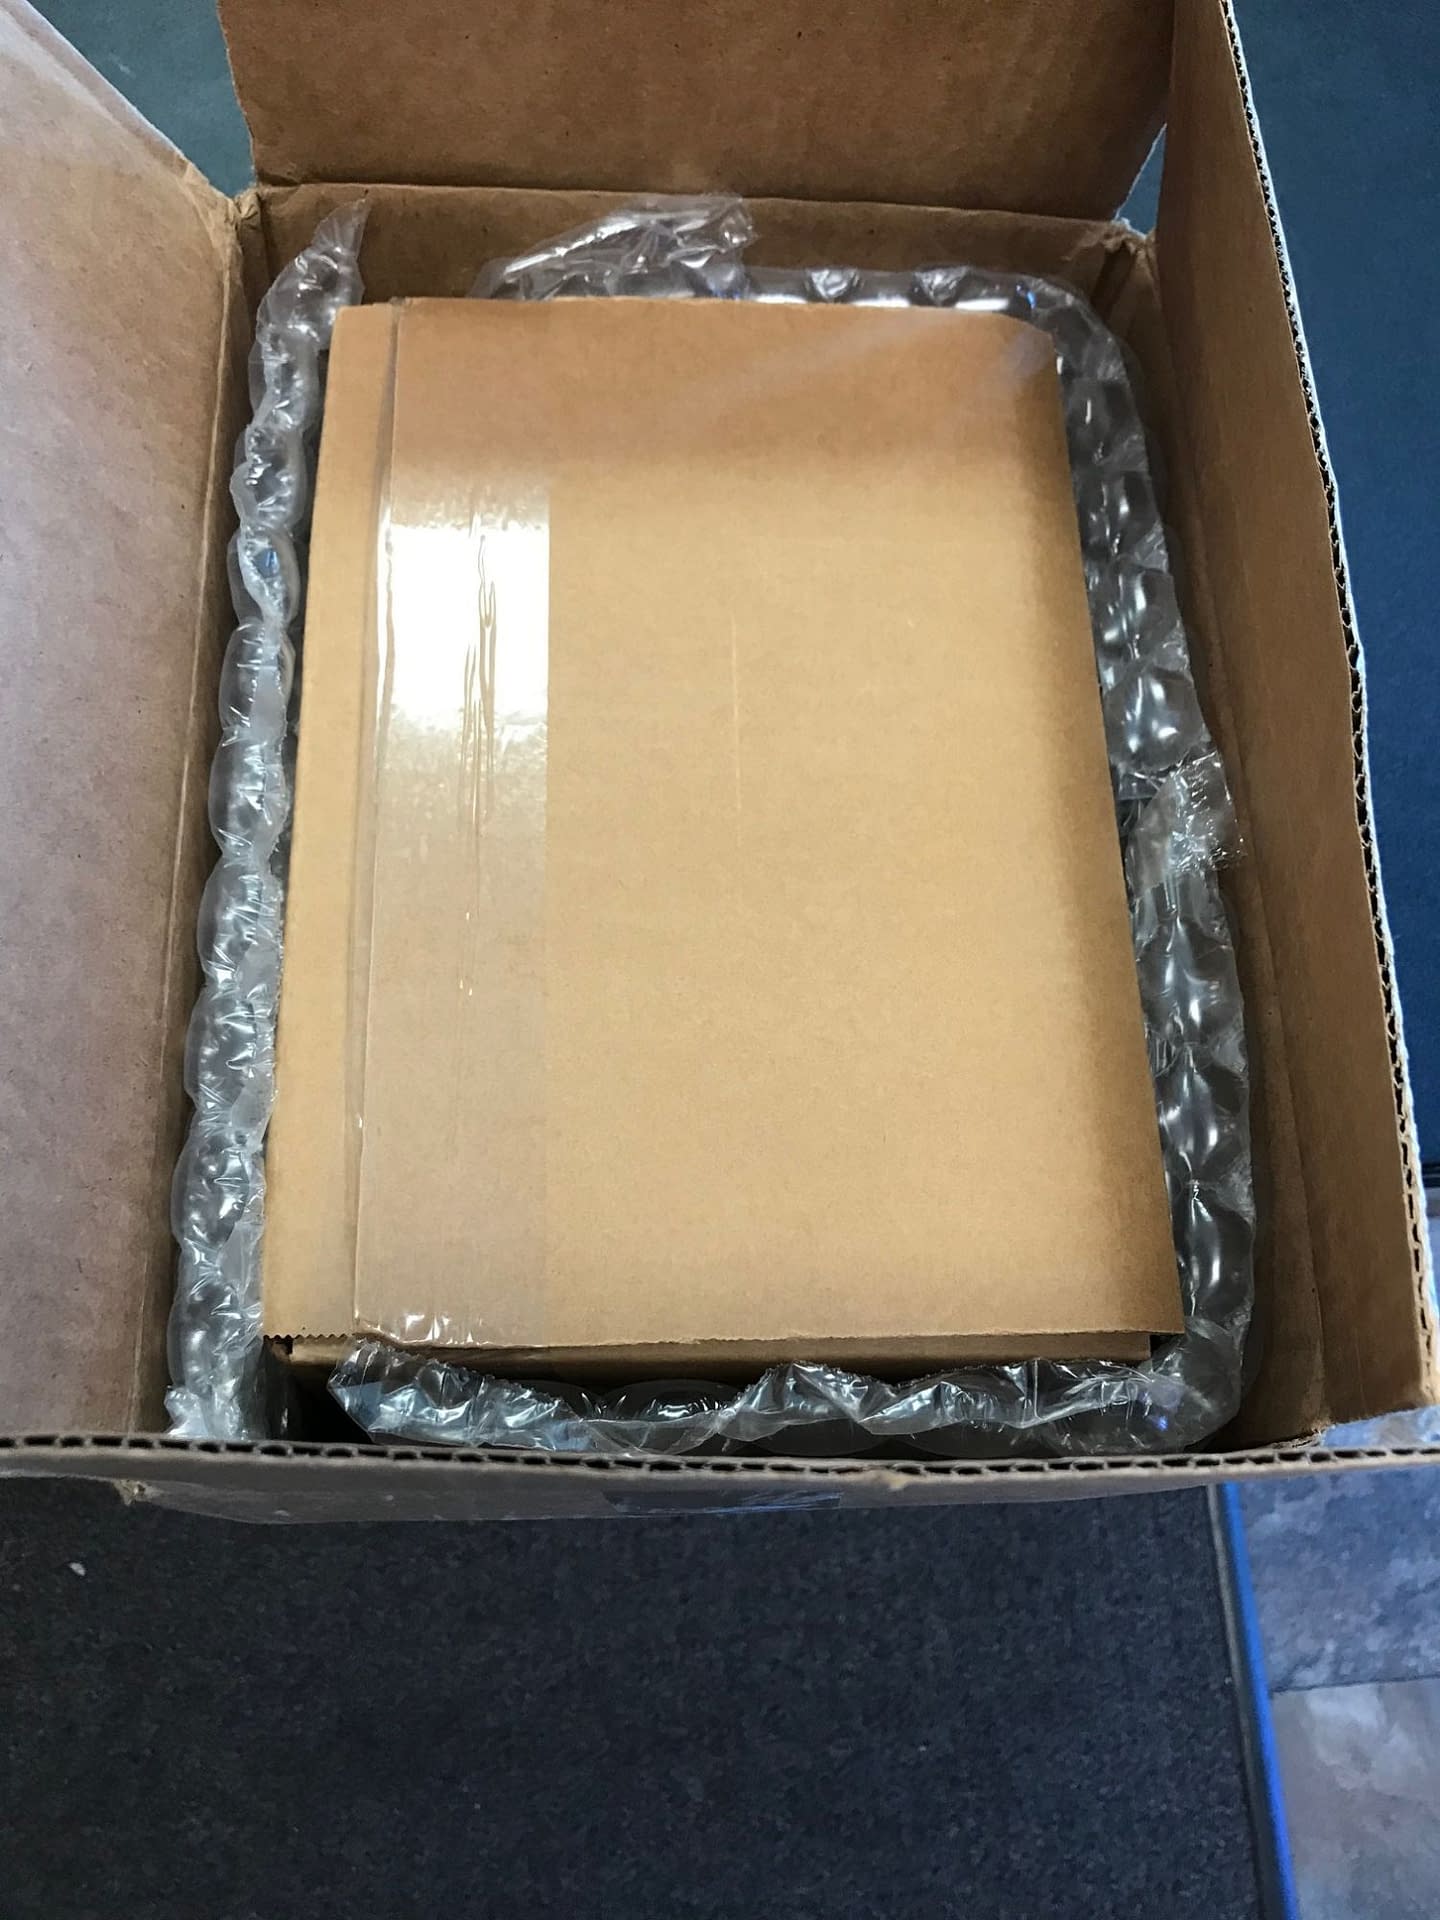 This Week's Penguin Random House Marvel Delivery Gets Bubble Wrap